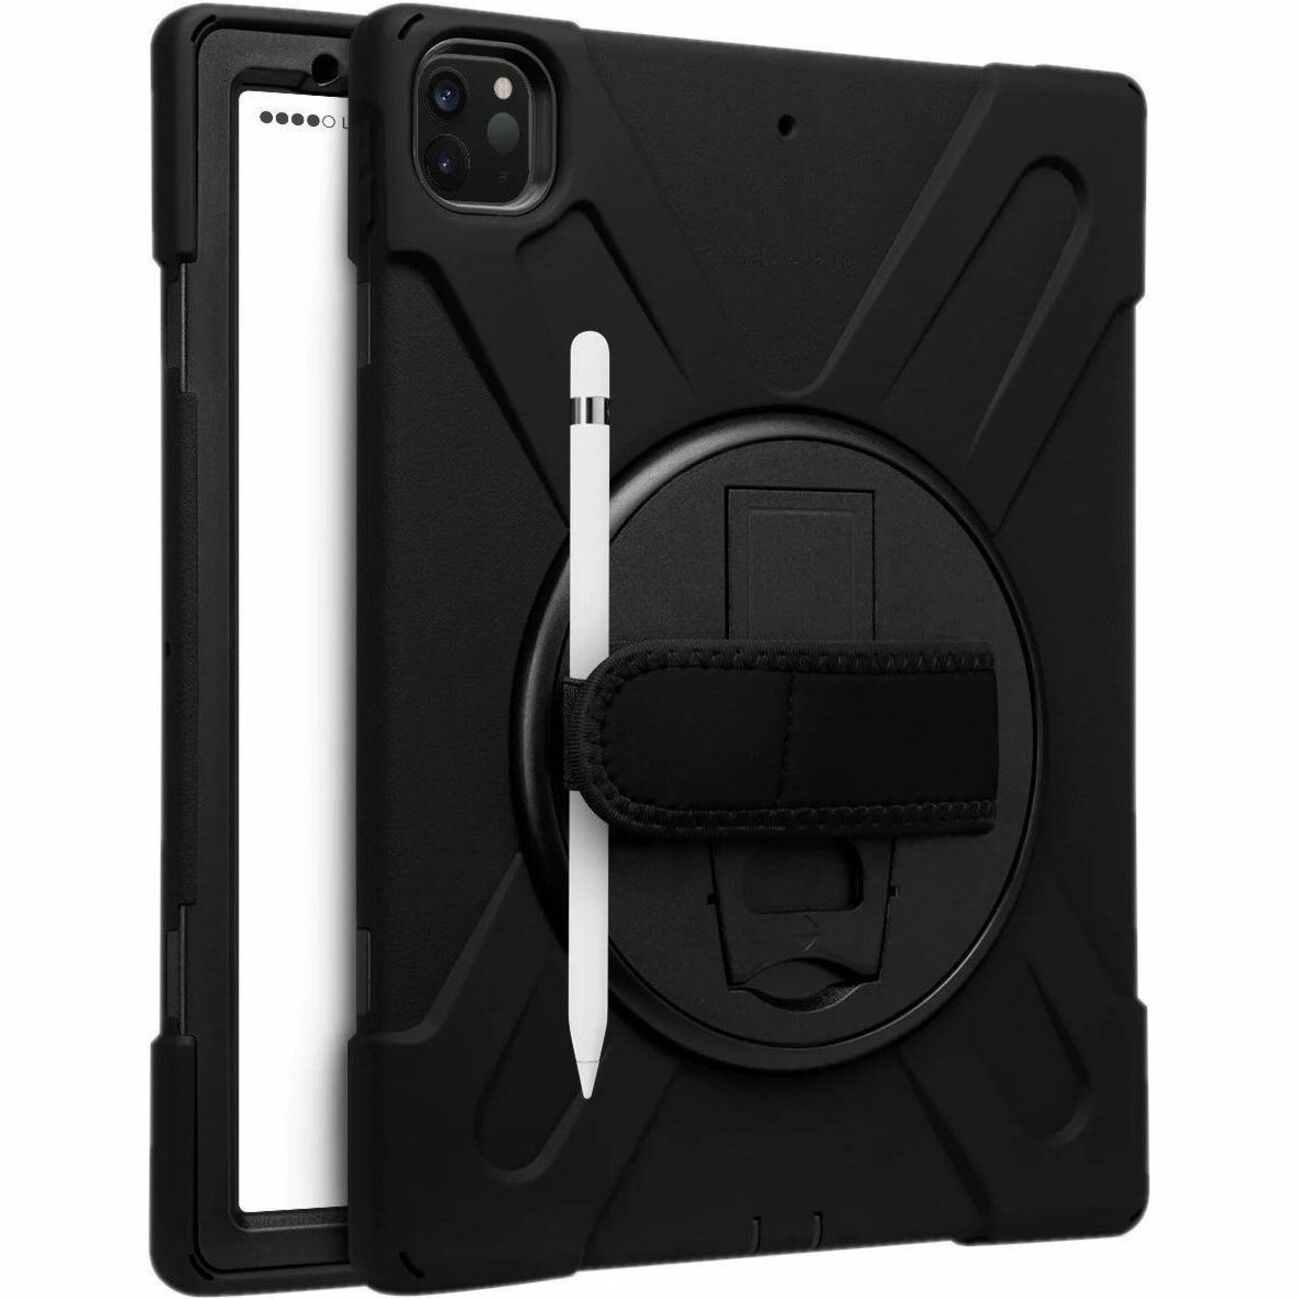 Cellairis Rapture Rugged Carrying Case for 12.9" Apple iPad Pro (5th Generation), iPad Pro (6th Generation) iPad Pro (02-0440001)